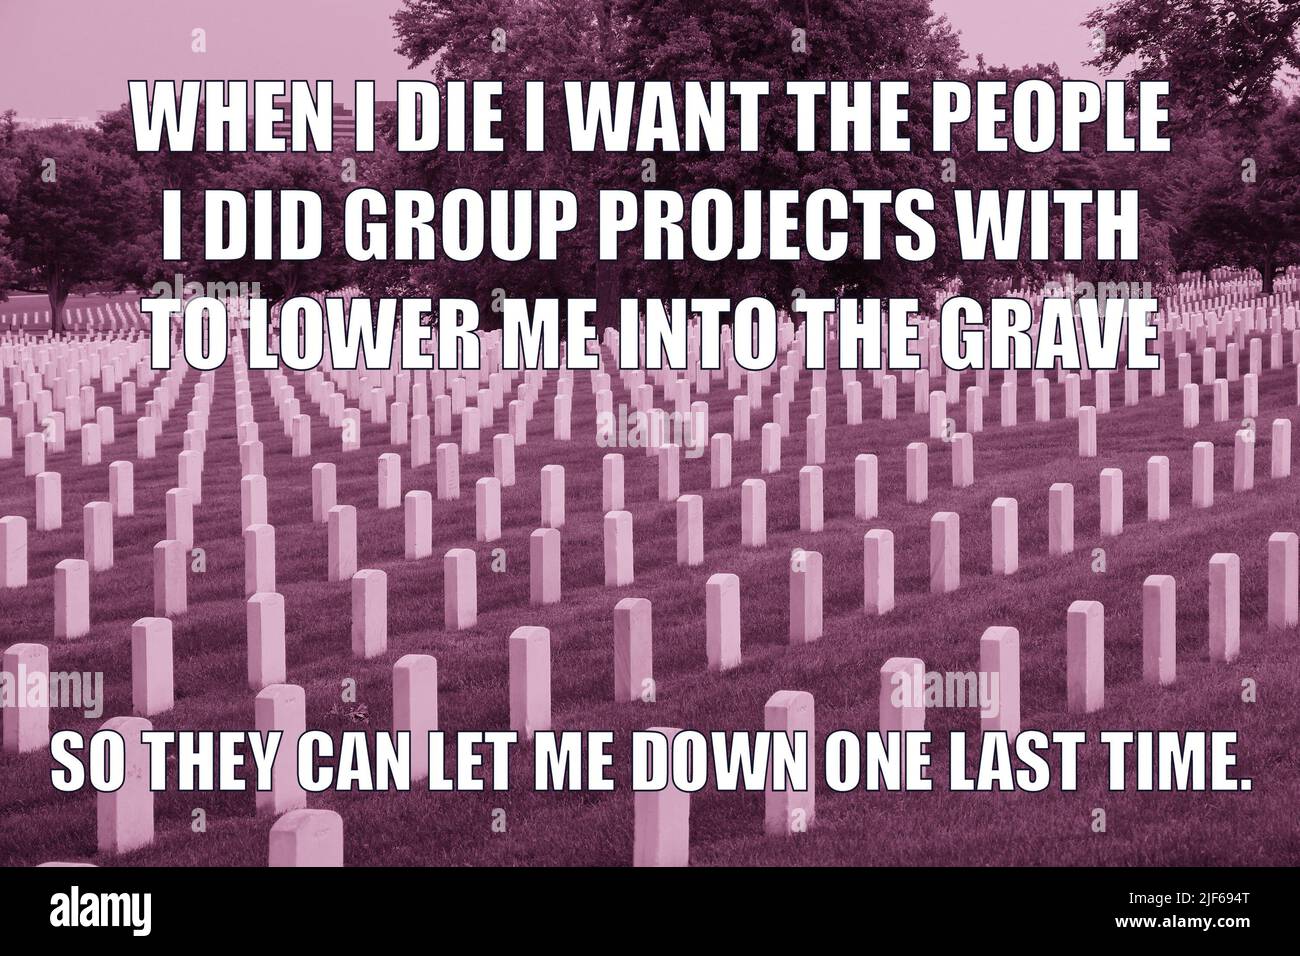 Group project and cemetery dark humor funny meme for social media sharing. Black humor about group project teamwork. Stock Photo